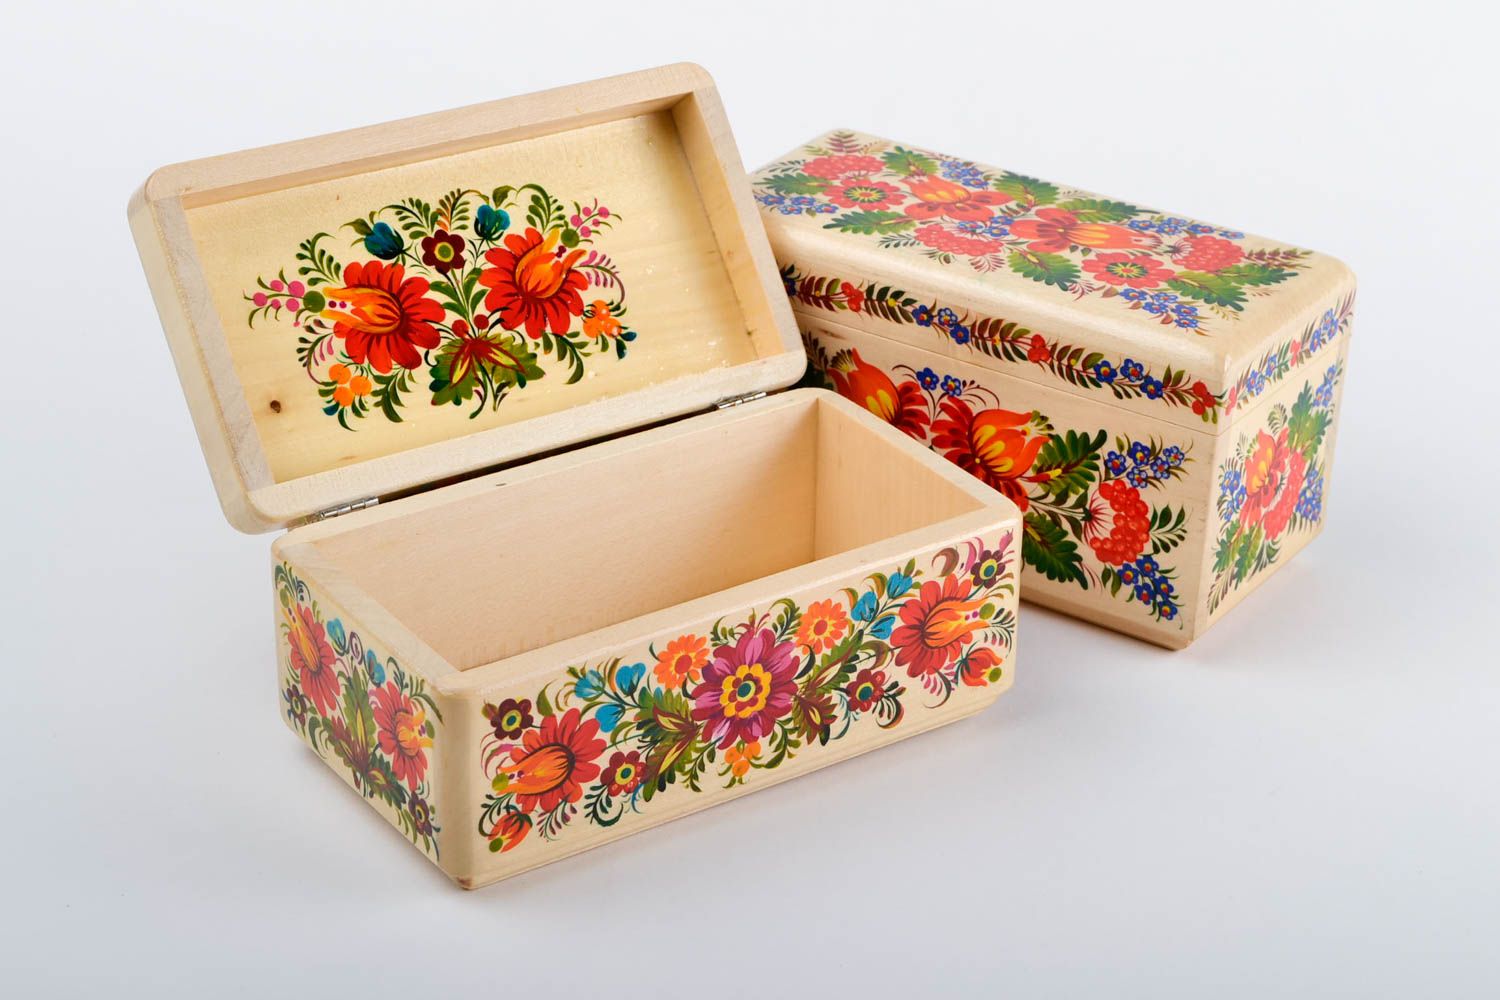 Handmade gifts wooden jewelry boxes jewellery gift boxes rustic home decor photo 4